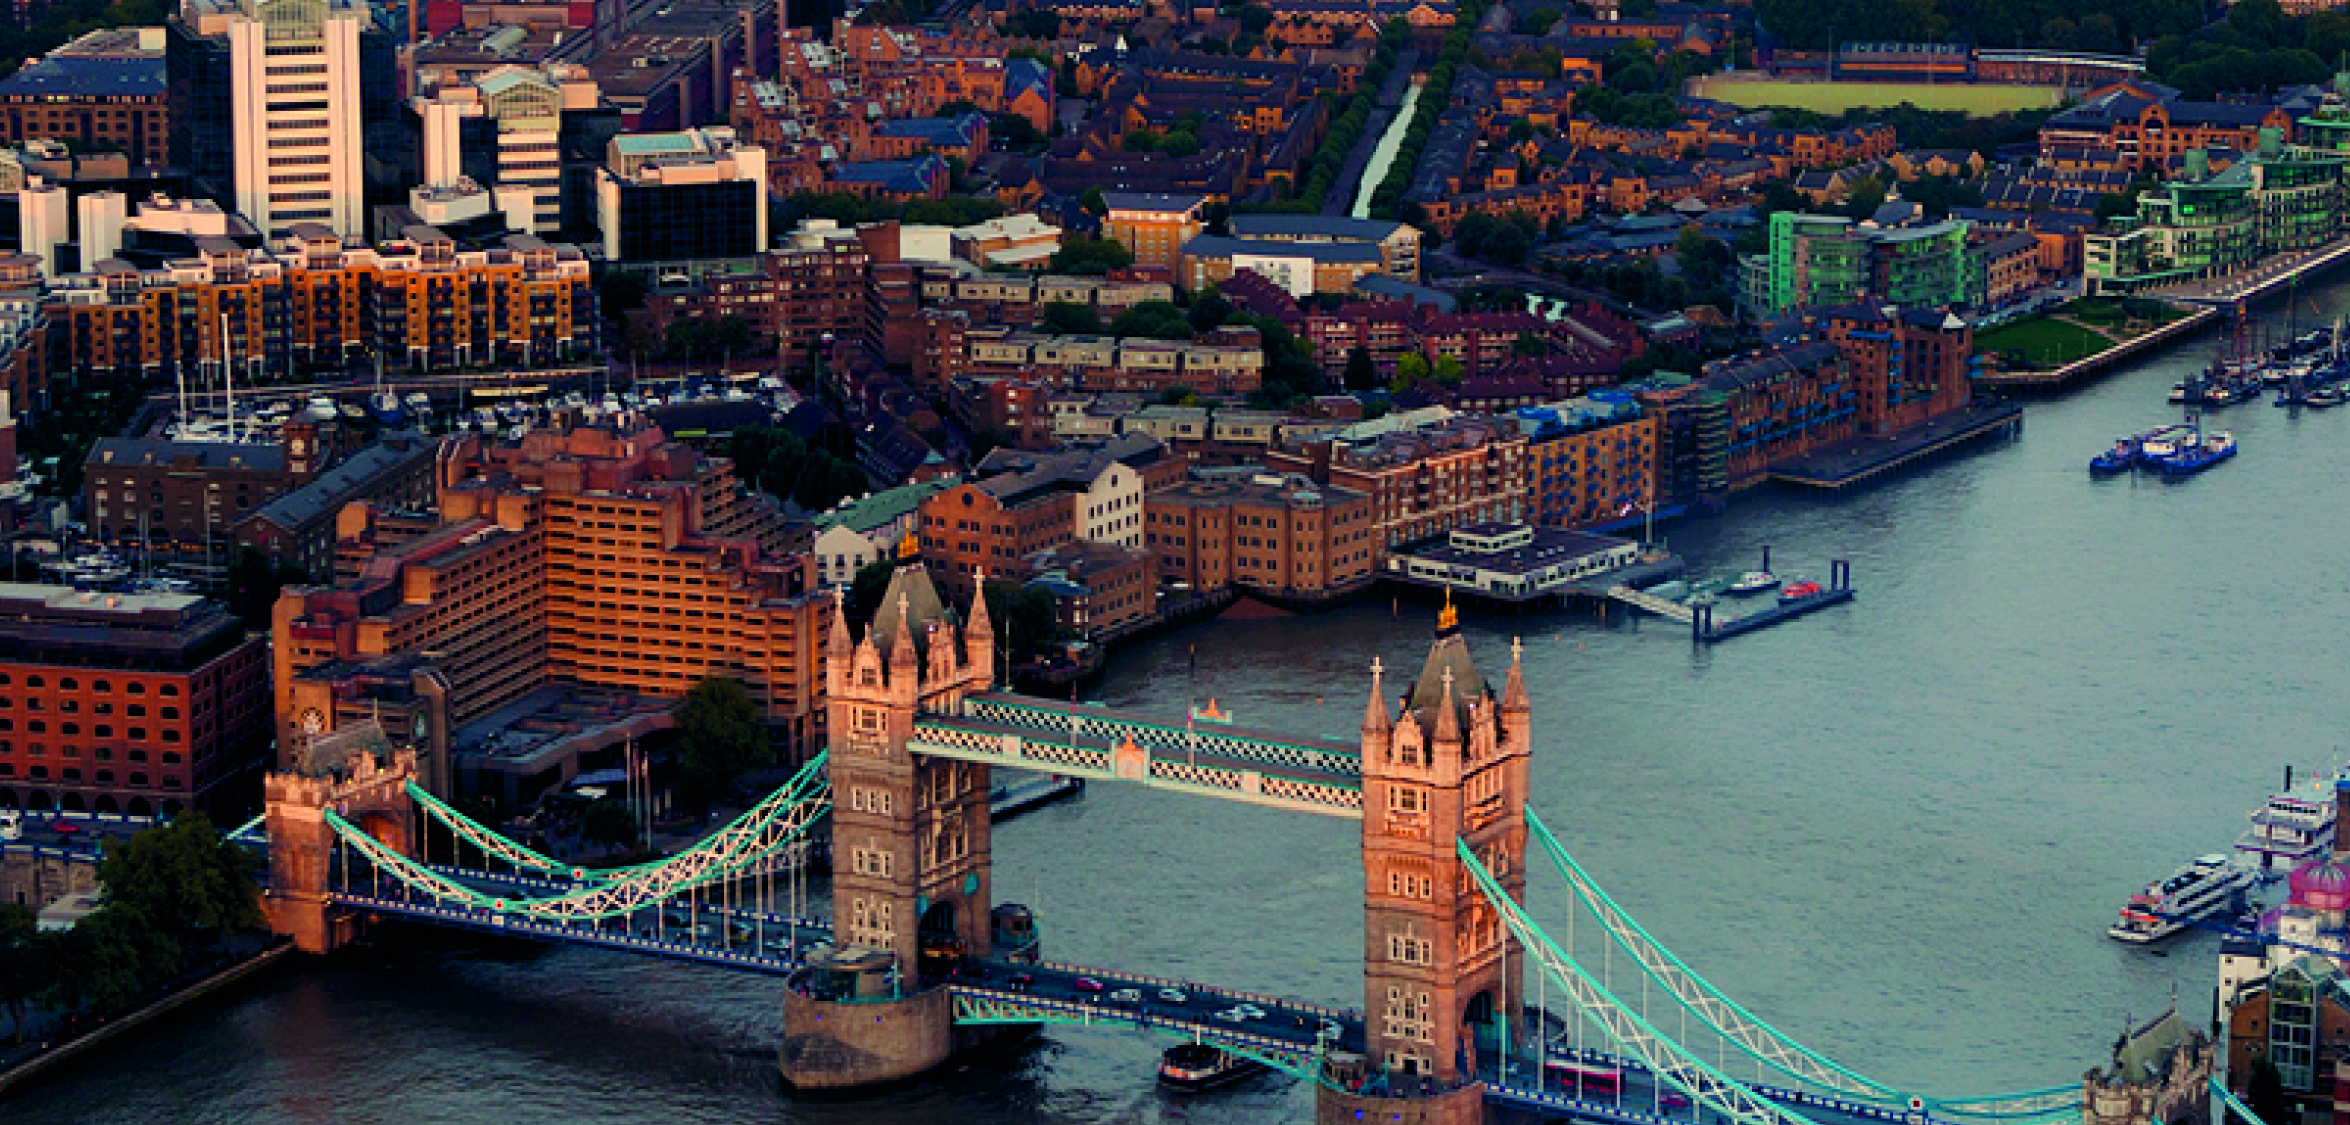 Arial view of London tower